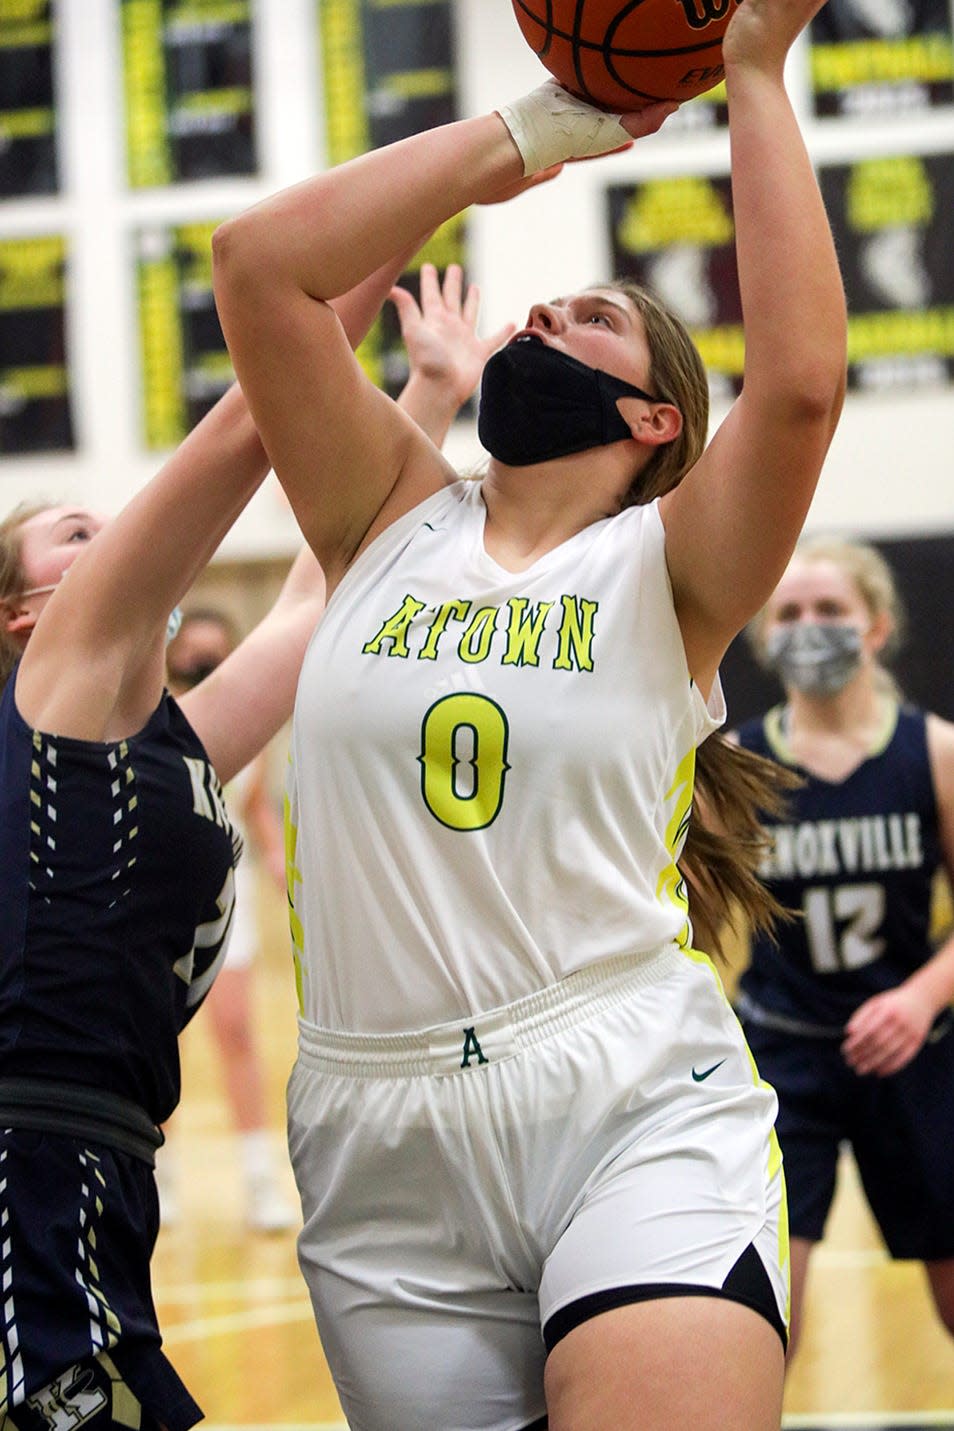 Abingdon-Avon Brook Pieper leans in for a short jump shot during the Tornadoes' 59-39 win over Knoxville on Monday, Feb. 22, 2021 in Abingdon.